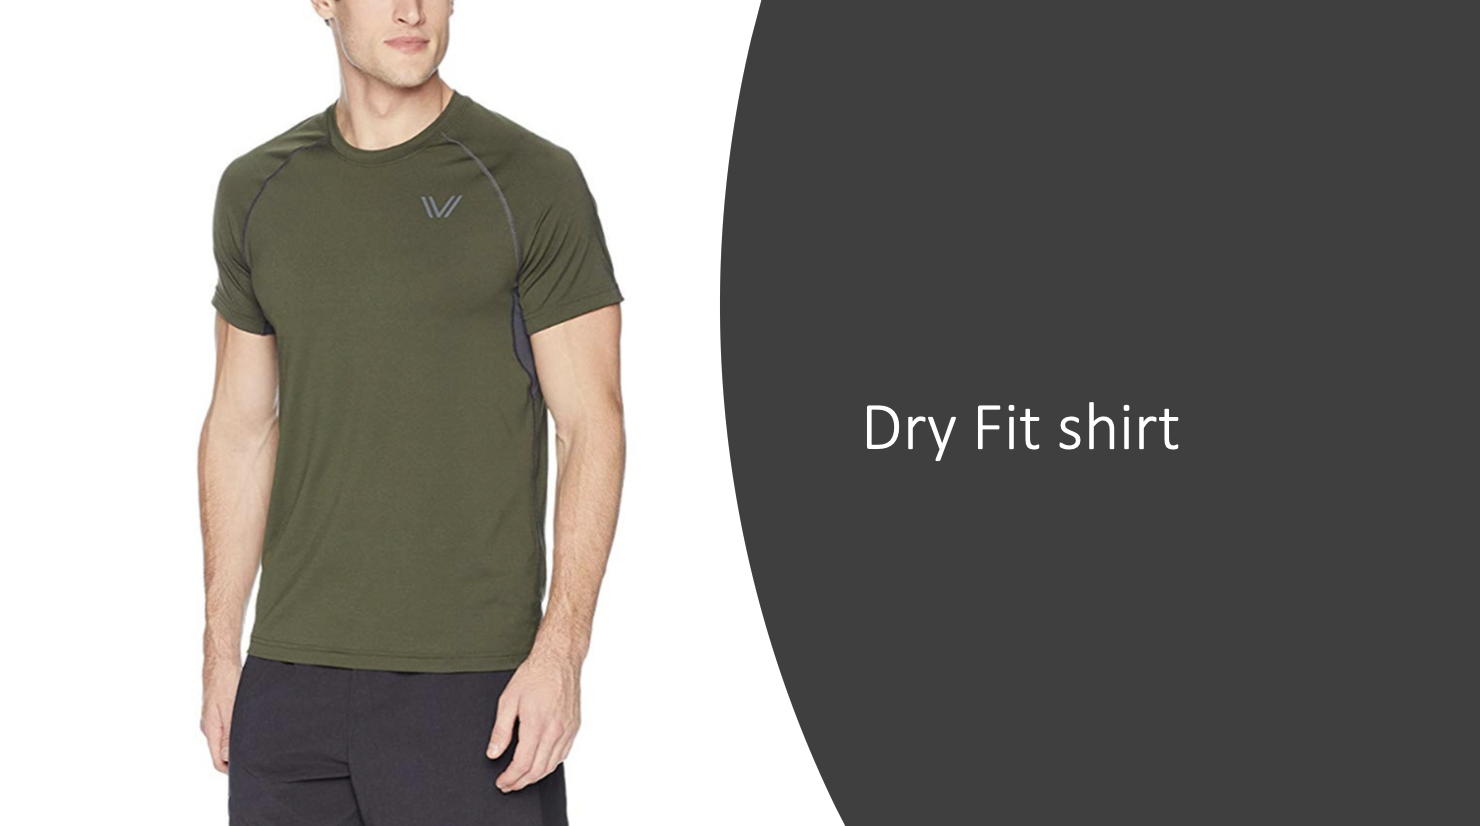 Dry fit Shirt